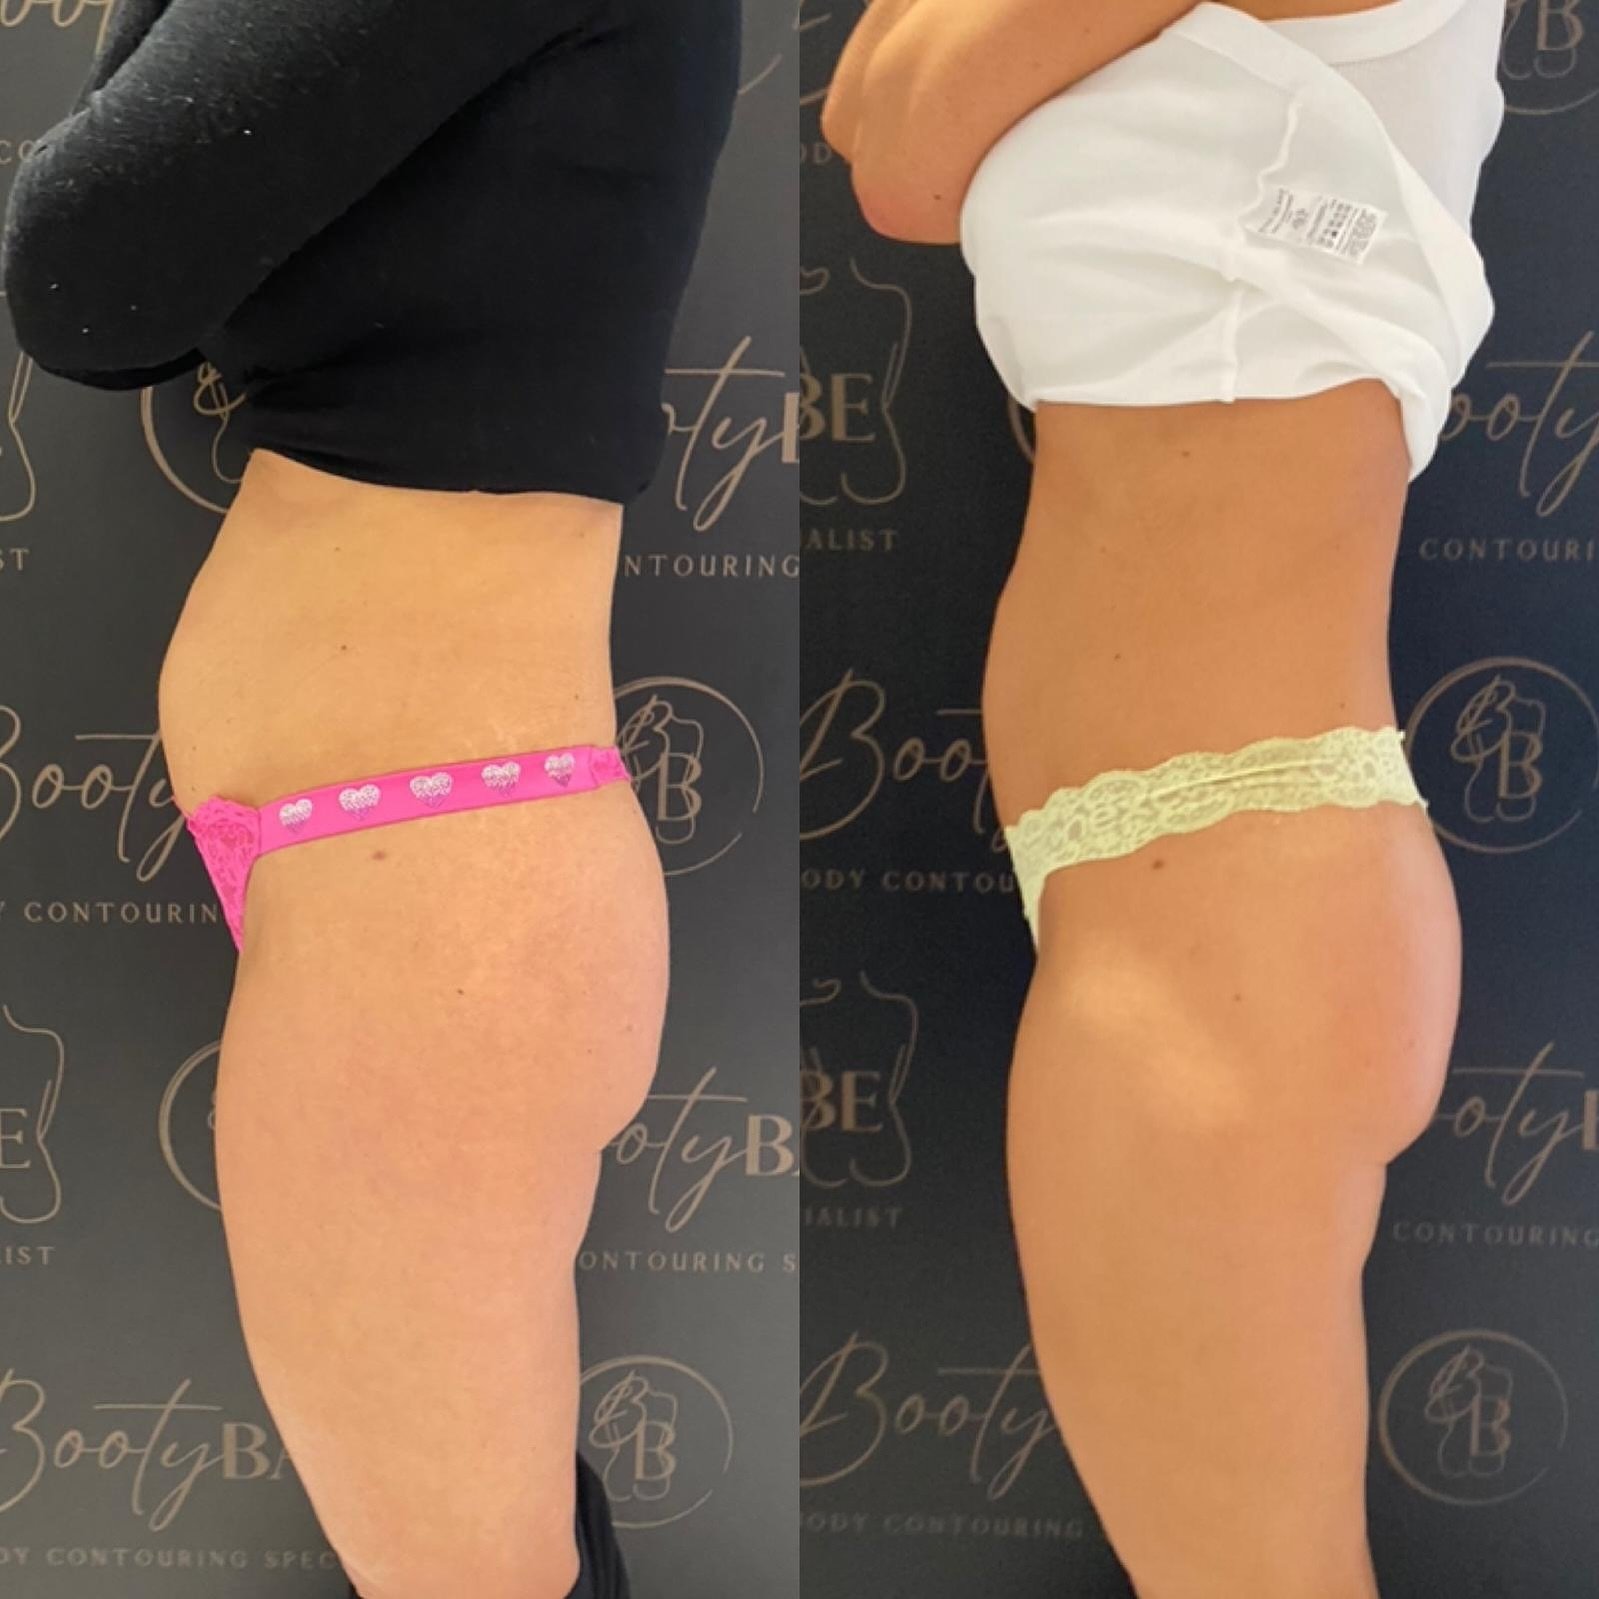 Incredible results so far for another beautiful client 🥰🥰

✅ DM to book your appointments
✅ DM about our machine &amp; training 

#tummytuck #nonsurgical #nonsurgicaltummytuck #inchloss #skintightening #collagen #cavitation #radiofrequency #ripley 